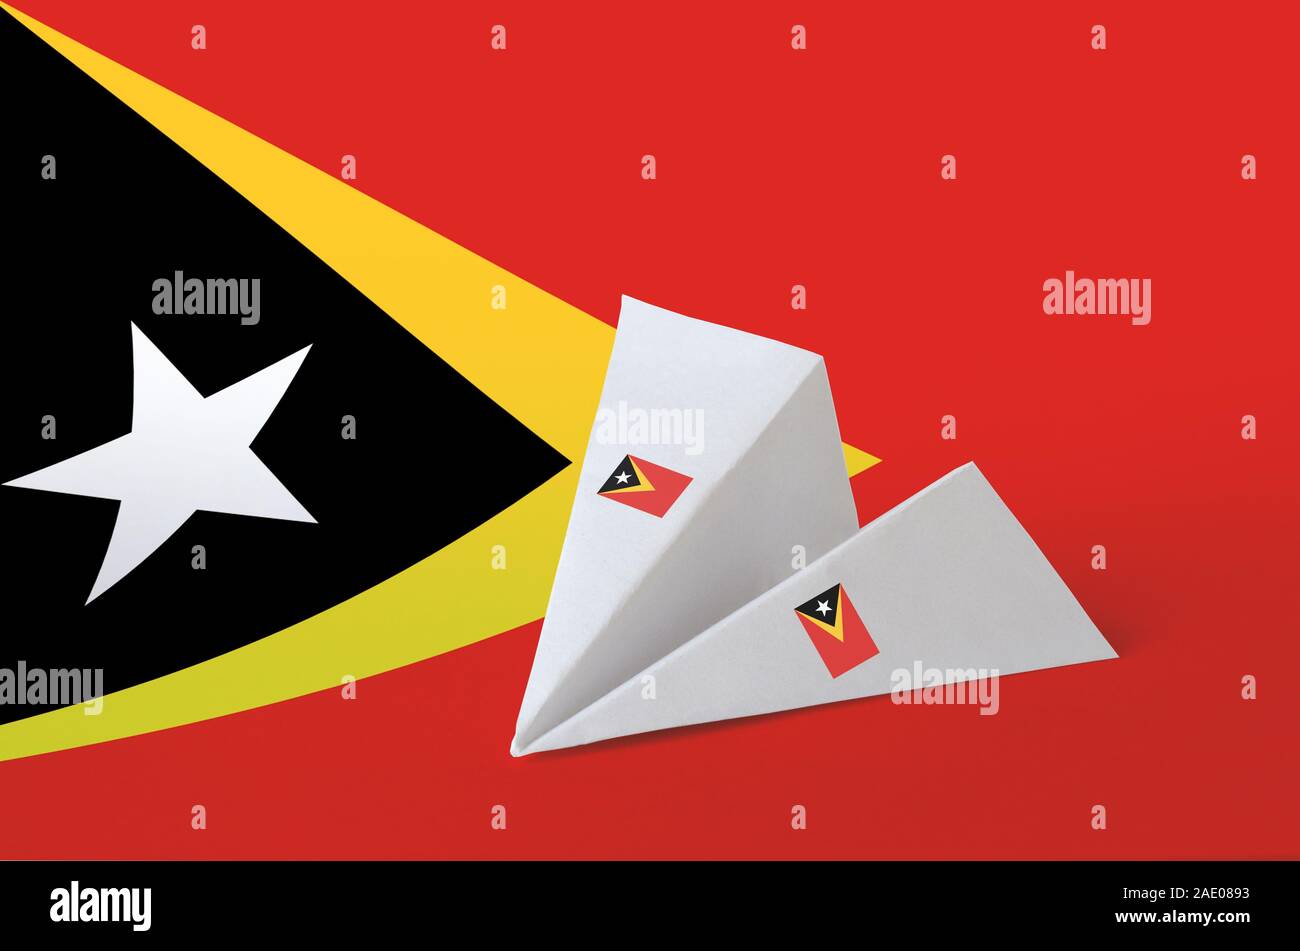 Timor Leste flag depicted on paper origami airplane. Oriental handmade arts concept Stock Photo